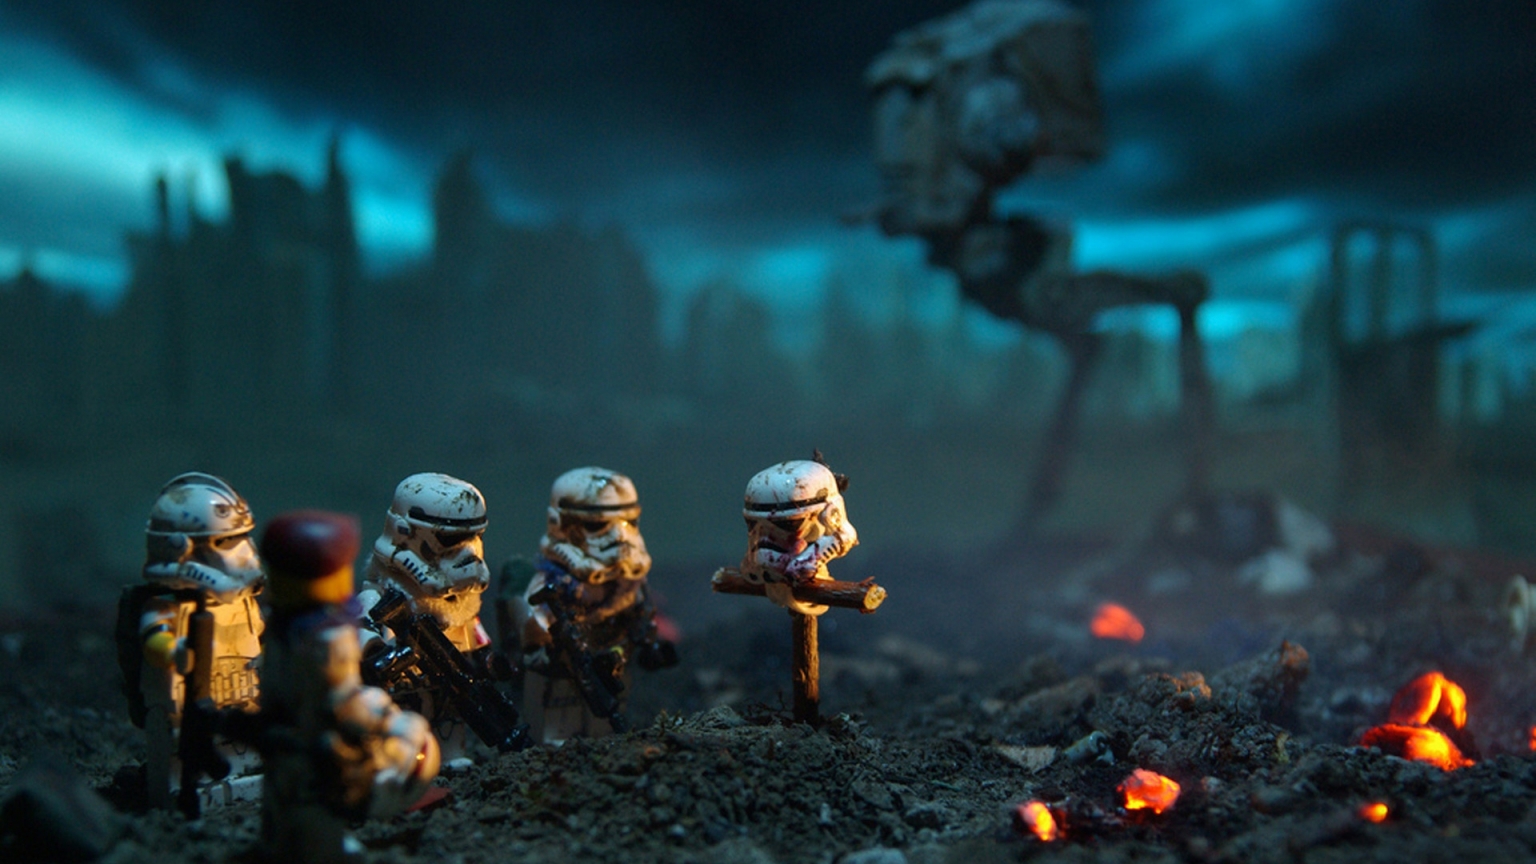 Star Wars Lego Soldiers for 1536 x 864 HDTV resolution